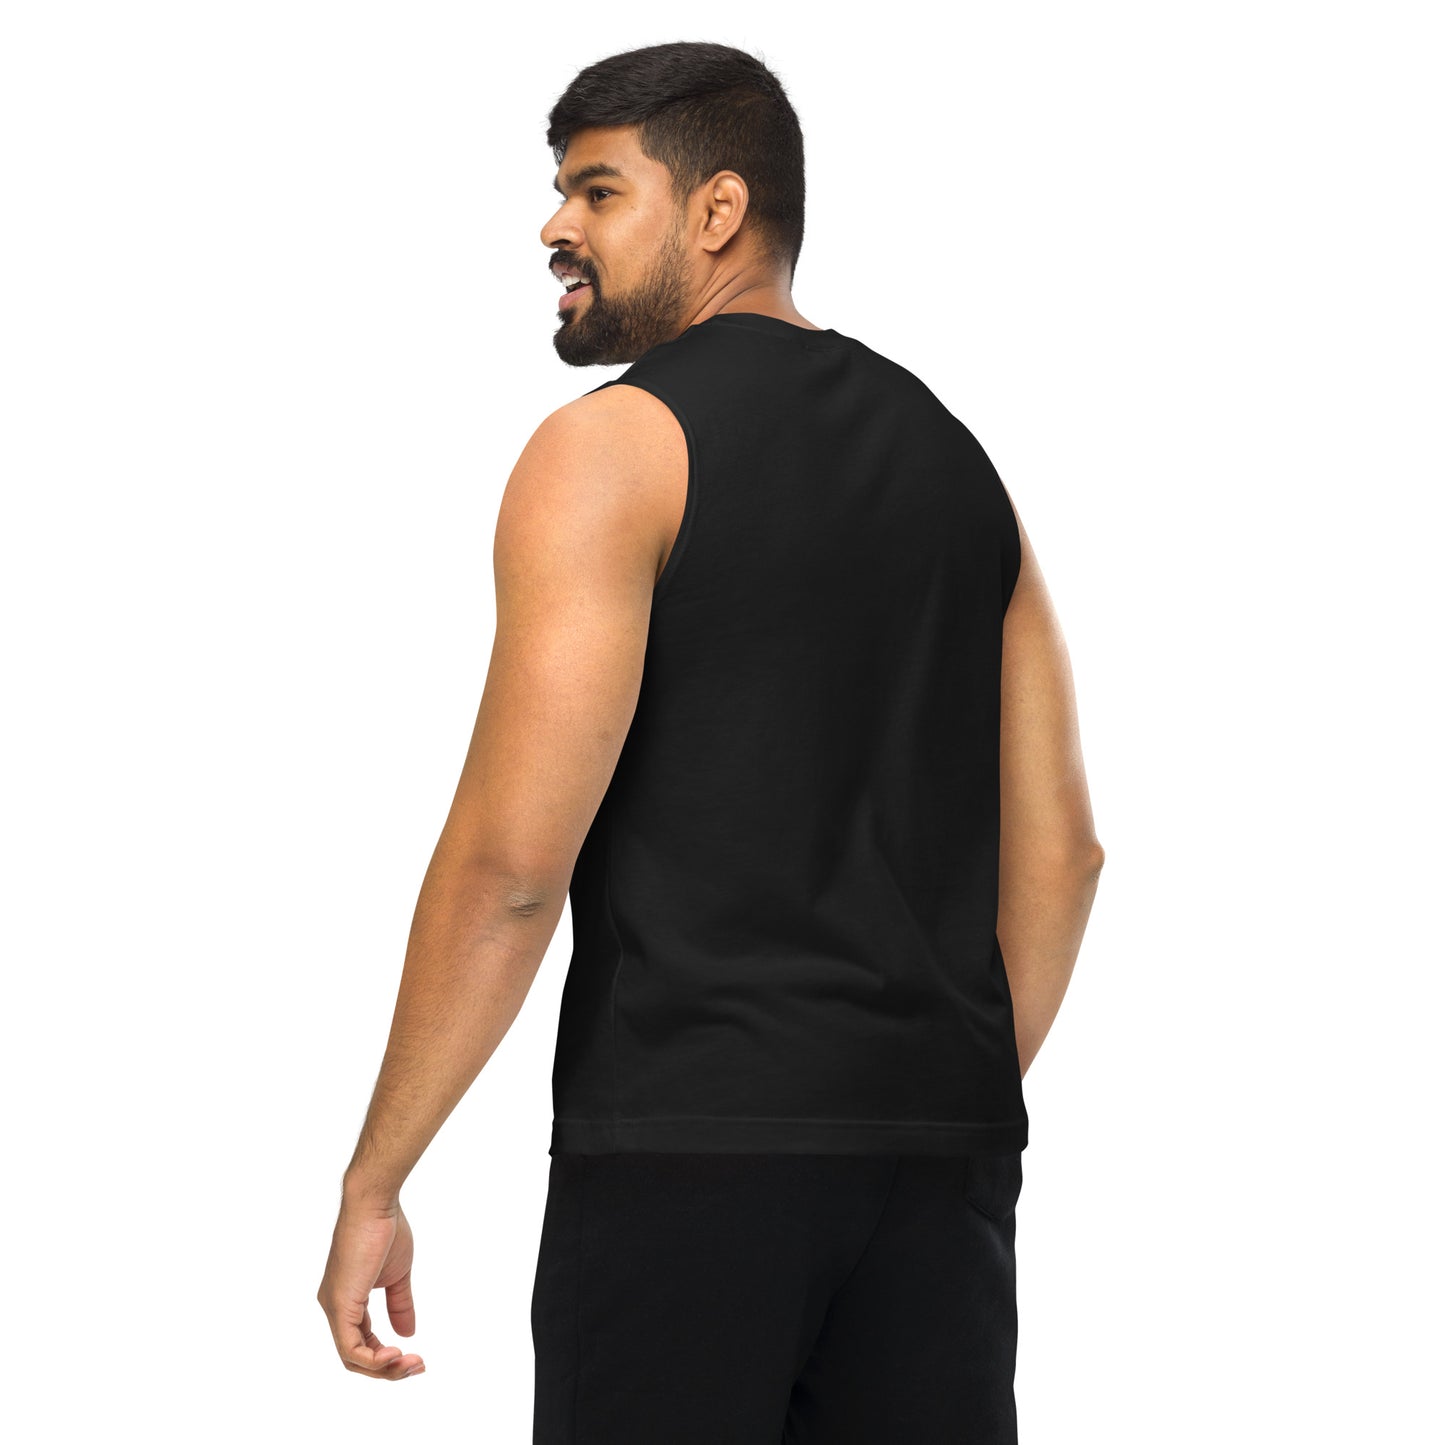 Triathlete Ready for Takeoff Muscle Shirt